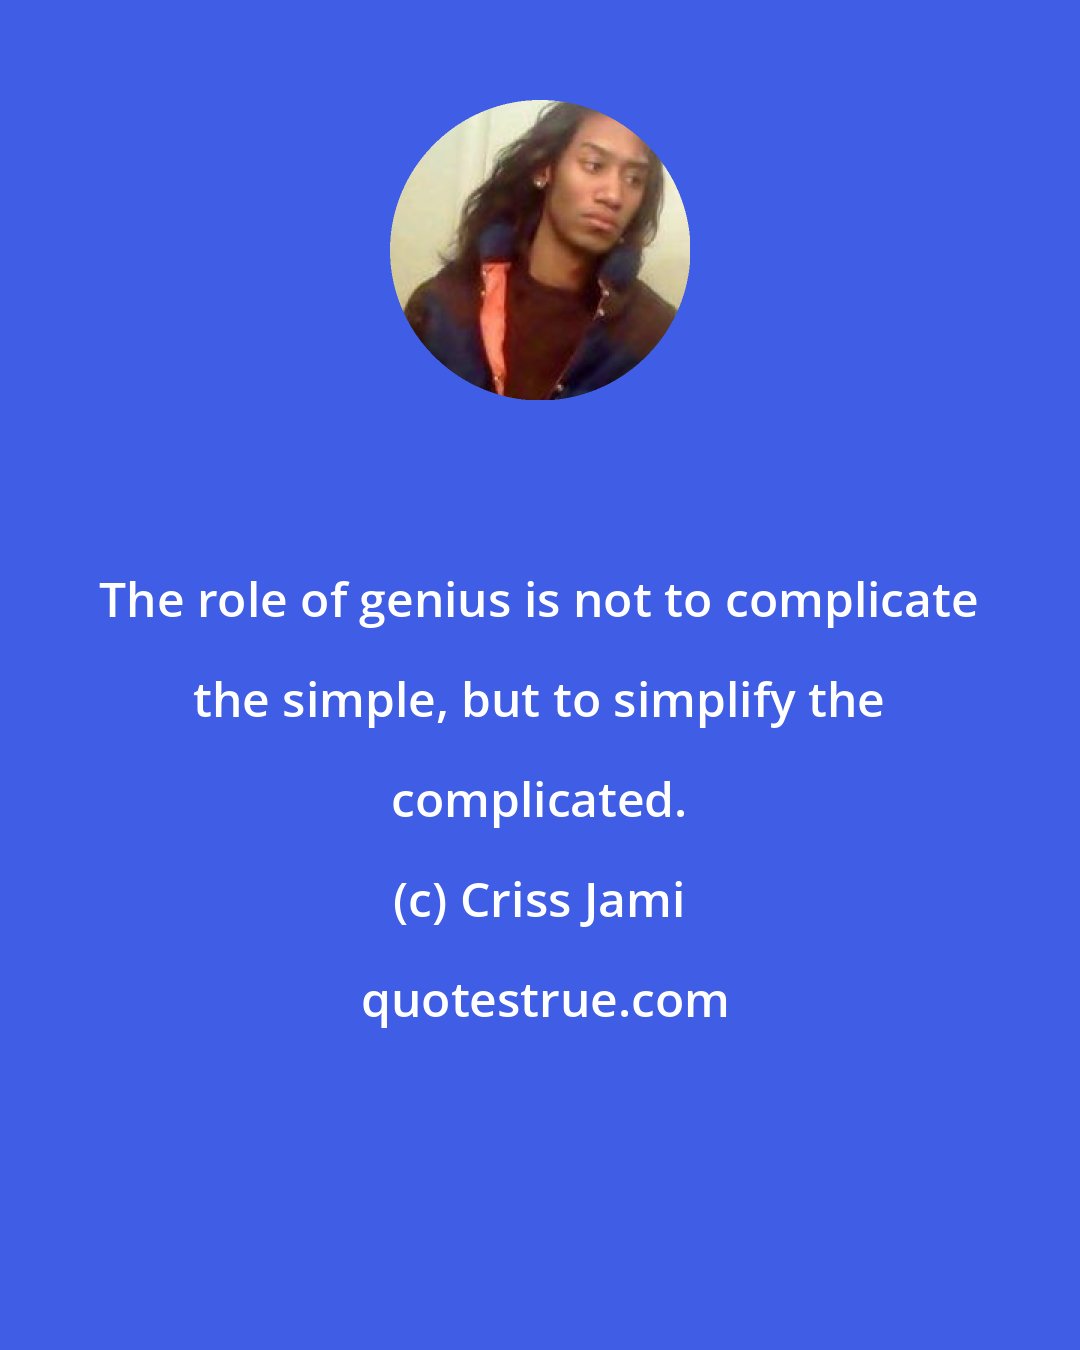 Criss Jami: The role of genius is not to complicate the simple, but to simplify the complicated.